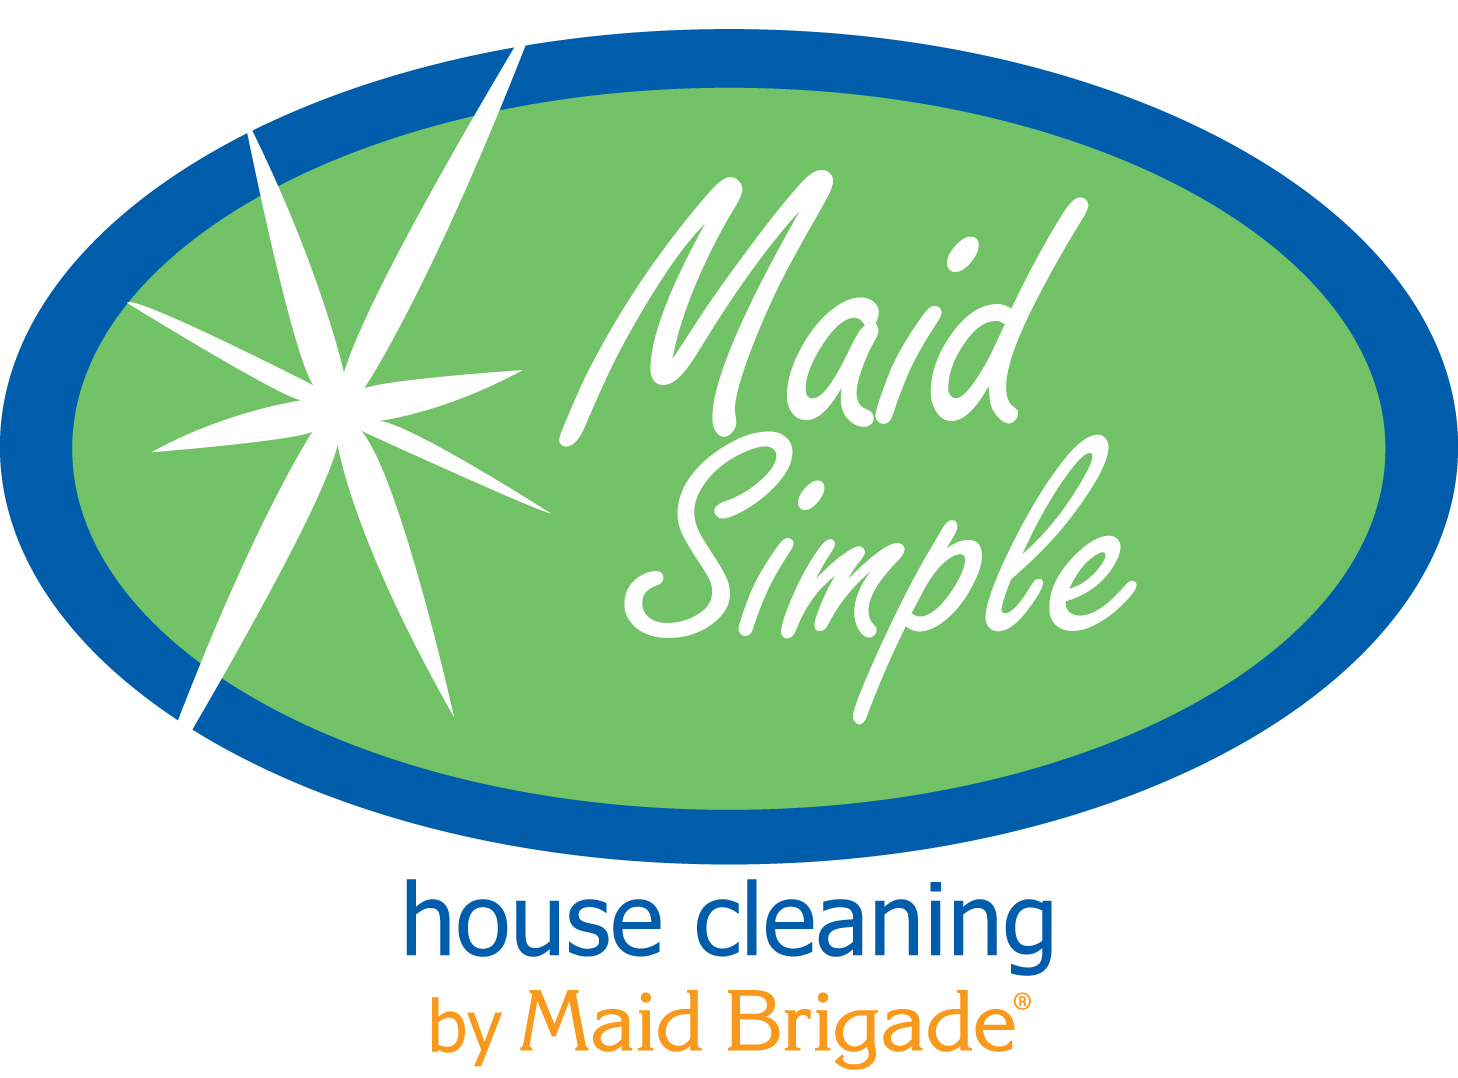 House Cleaning: House Cleaning Franchise